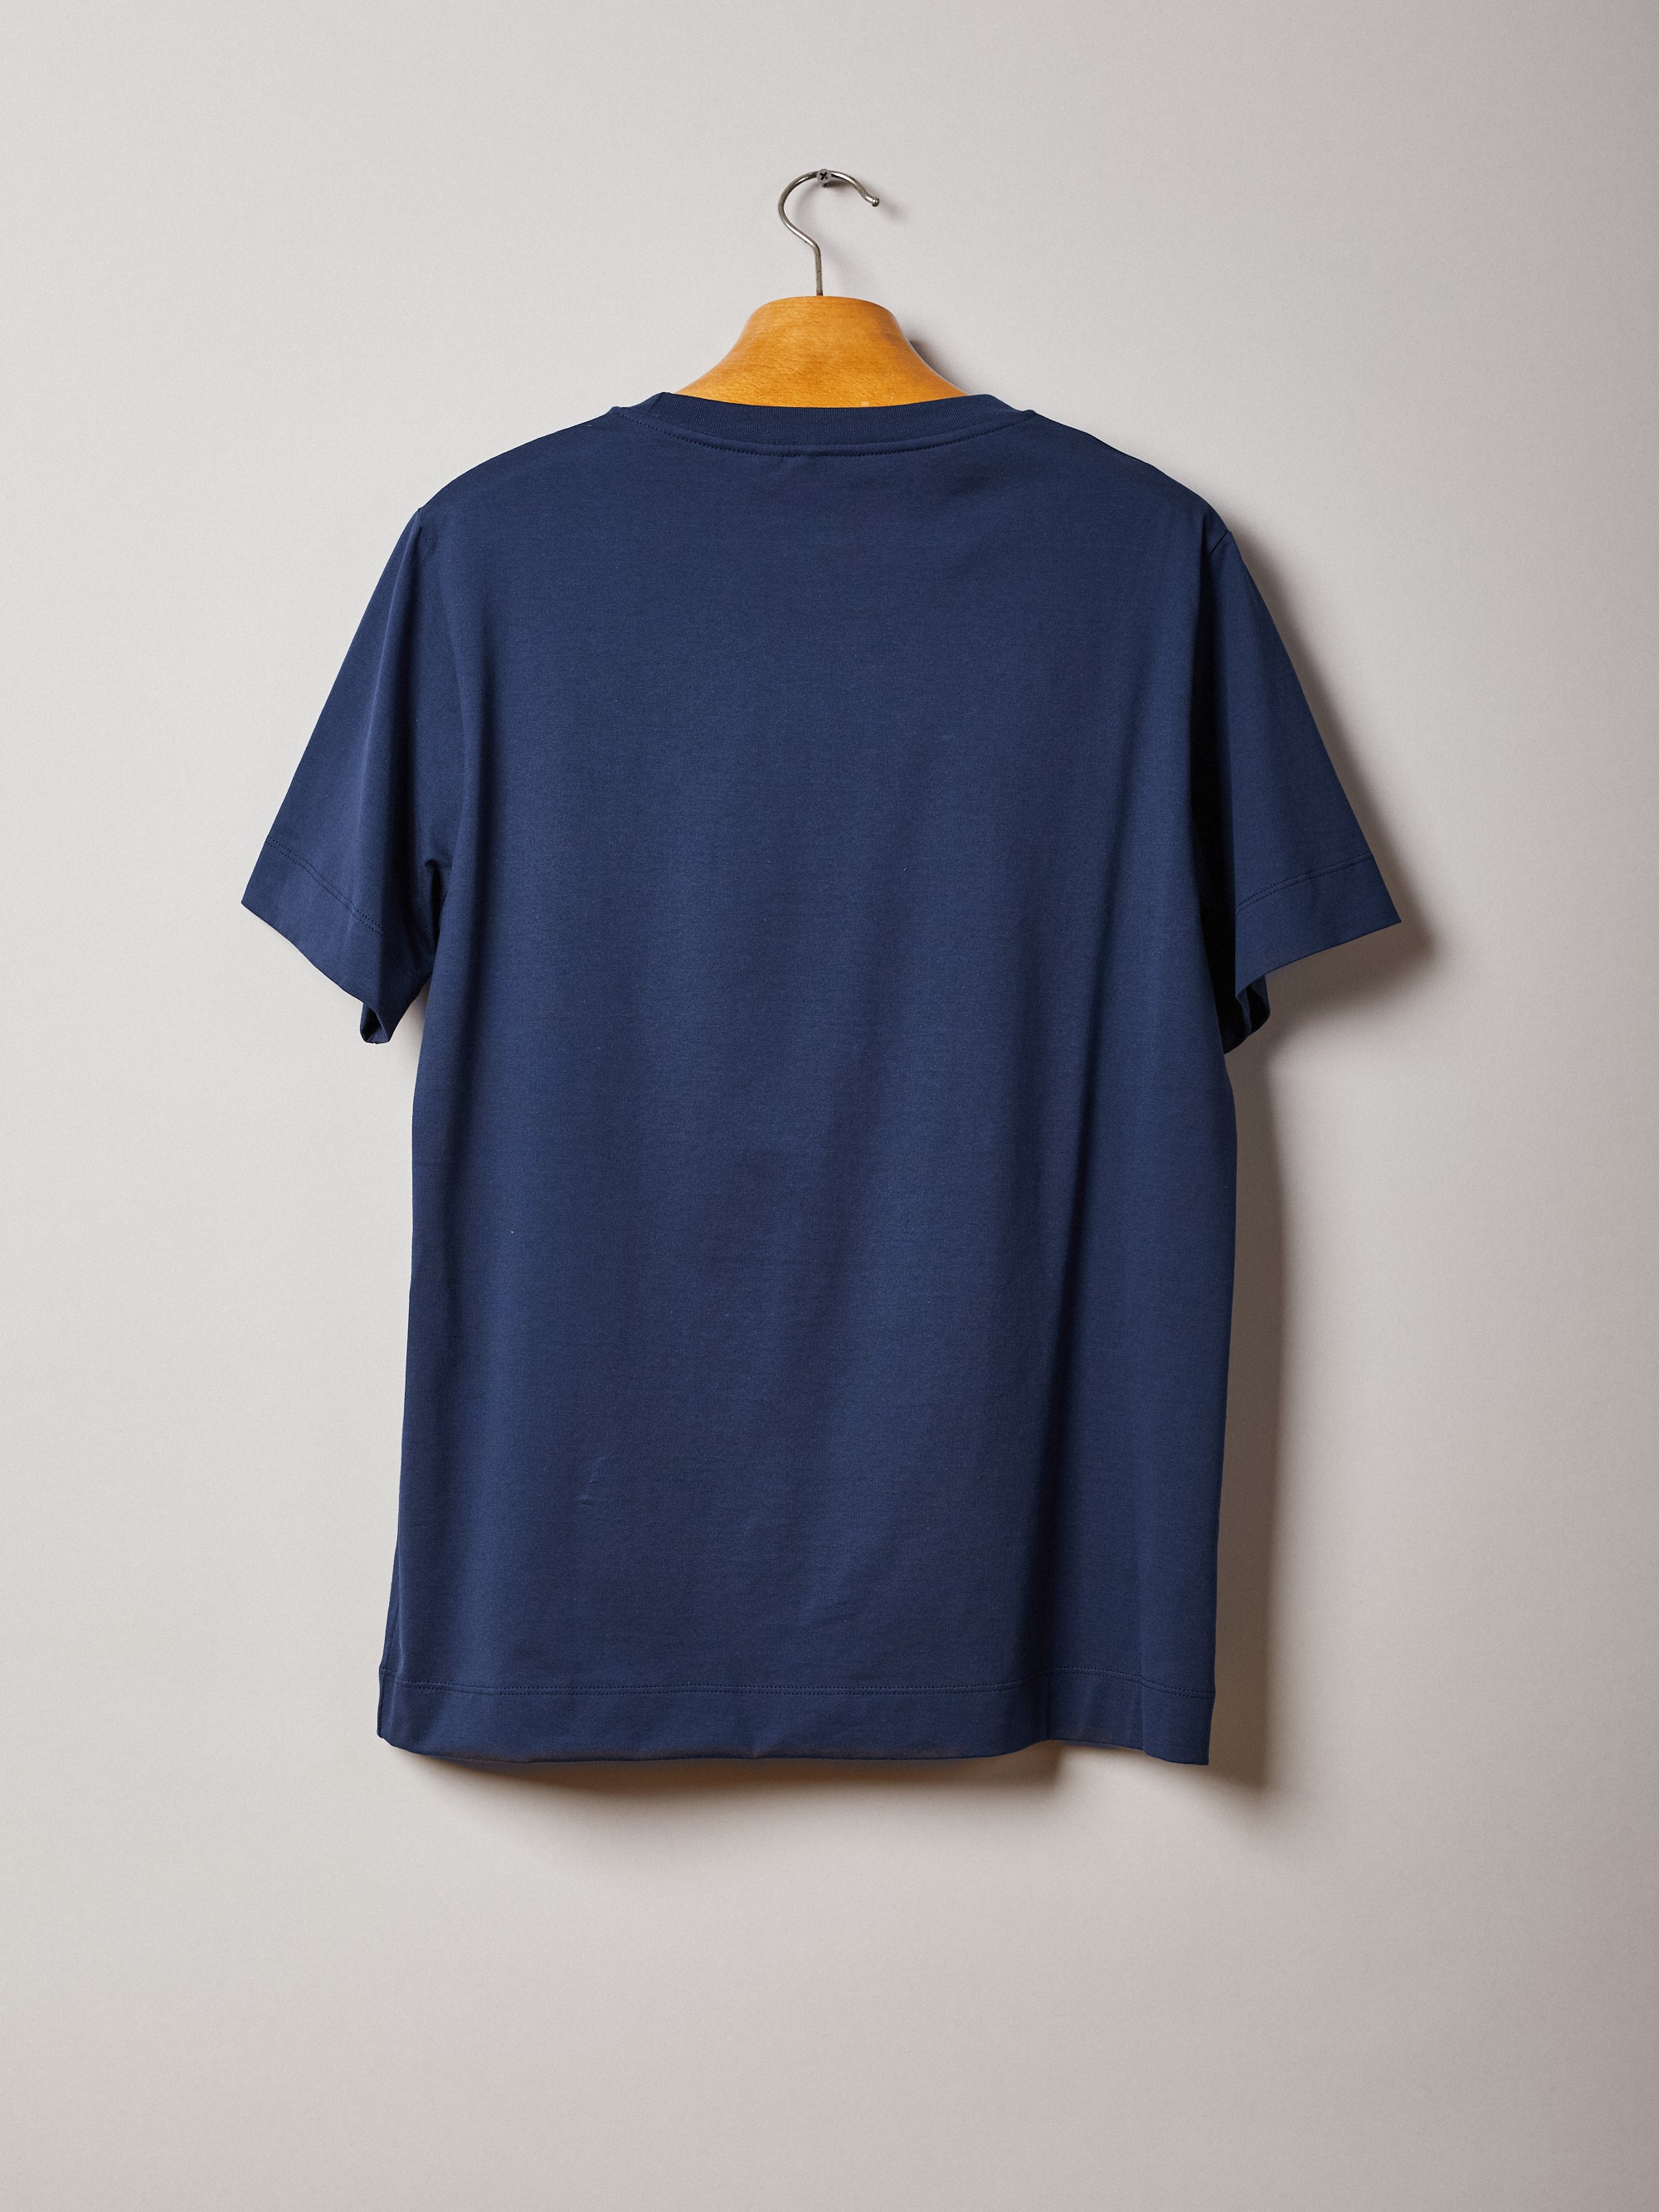 Victory Essentials VE Tom SS Tee 170 (2-Pack) T-Shirts Navy